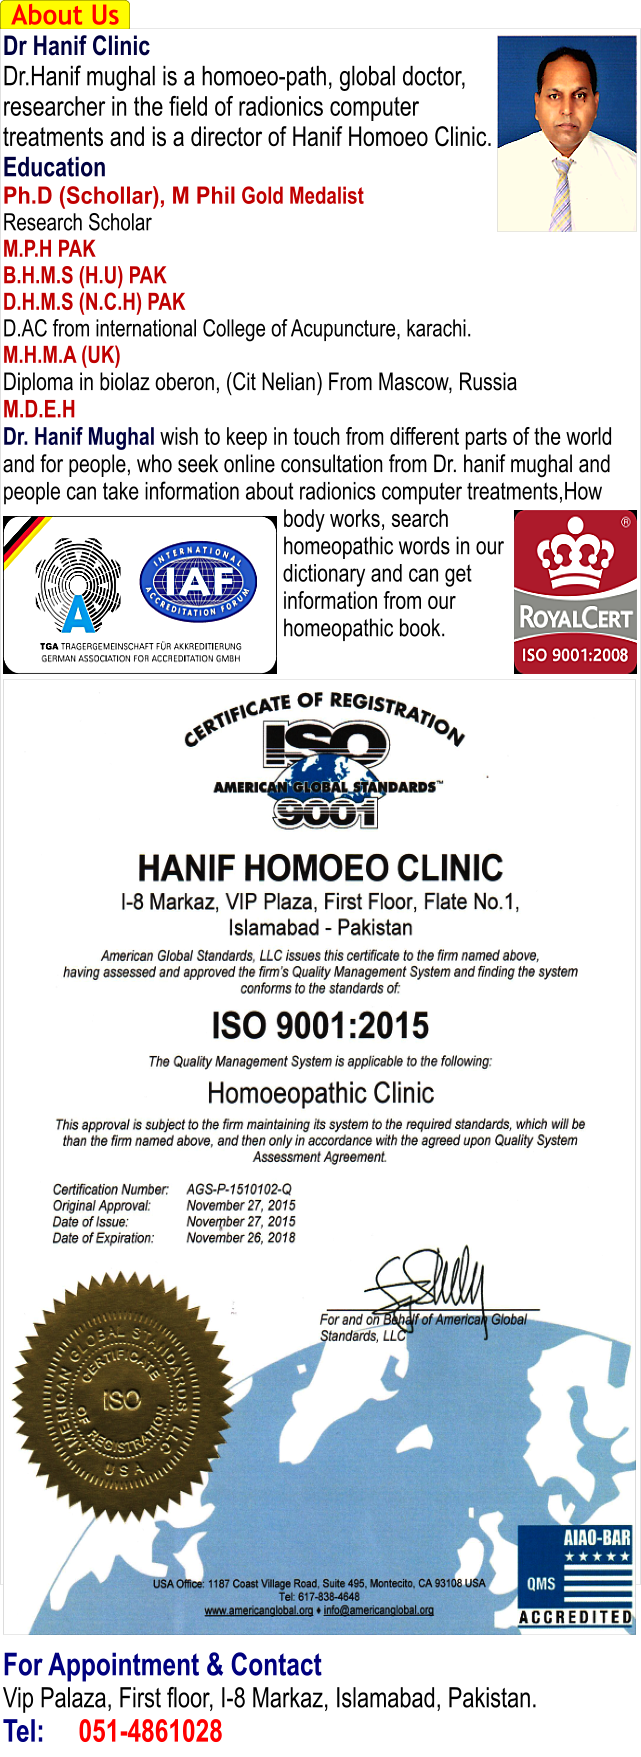 About Us Dr Hanif Clinic Dr.Hanif mughal is a homoeo-path, global doctor, researcher in the field of radionics computer treatments and is a director of Hanif Homoeo Clinic. Education Ph.D (Schollar), M Phil Gold Medalist Research Scholar M.P.H PAK B.H.M.S (H.U) PAK D.H.M.S (N.C.H) PAK D.AC from international College of Acupuncture, karachi. M.H.M.A (UK) Diploma in biolaz oberon, (Cit Nelian) From Mascow, Russia M.D.E.H Dr. Hanif Mughal wish to keep in touch from different parts of the world and for people, who seek online consultation from Dr. hanif mughal and people can take information about radionics computer treatments,How body works, search homeopathic words in our dictionary and can get information from our homeopathic book.                                        For Appointment & Contact Vip Palaza, First floor, I-8 Markaz, Islamabad, Pakistan. Tel:	051-4861028